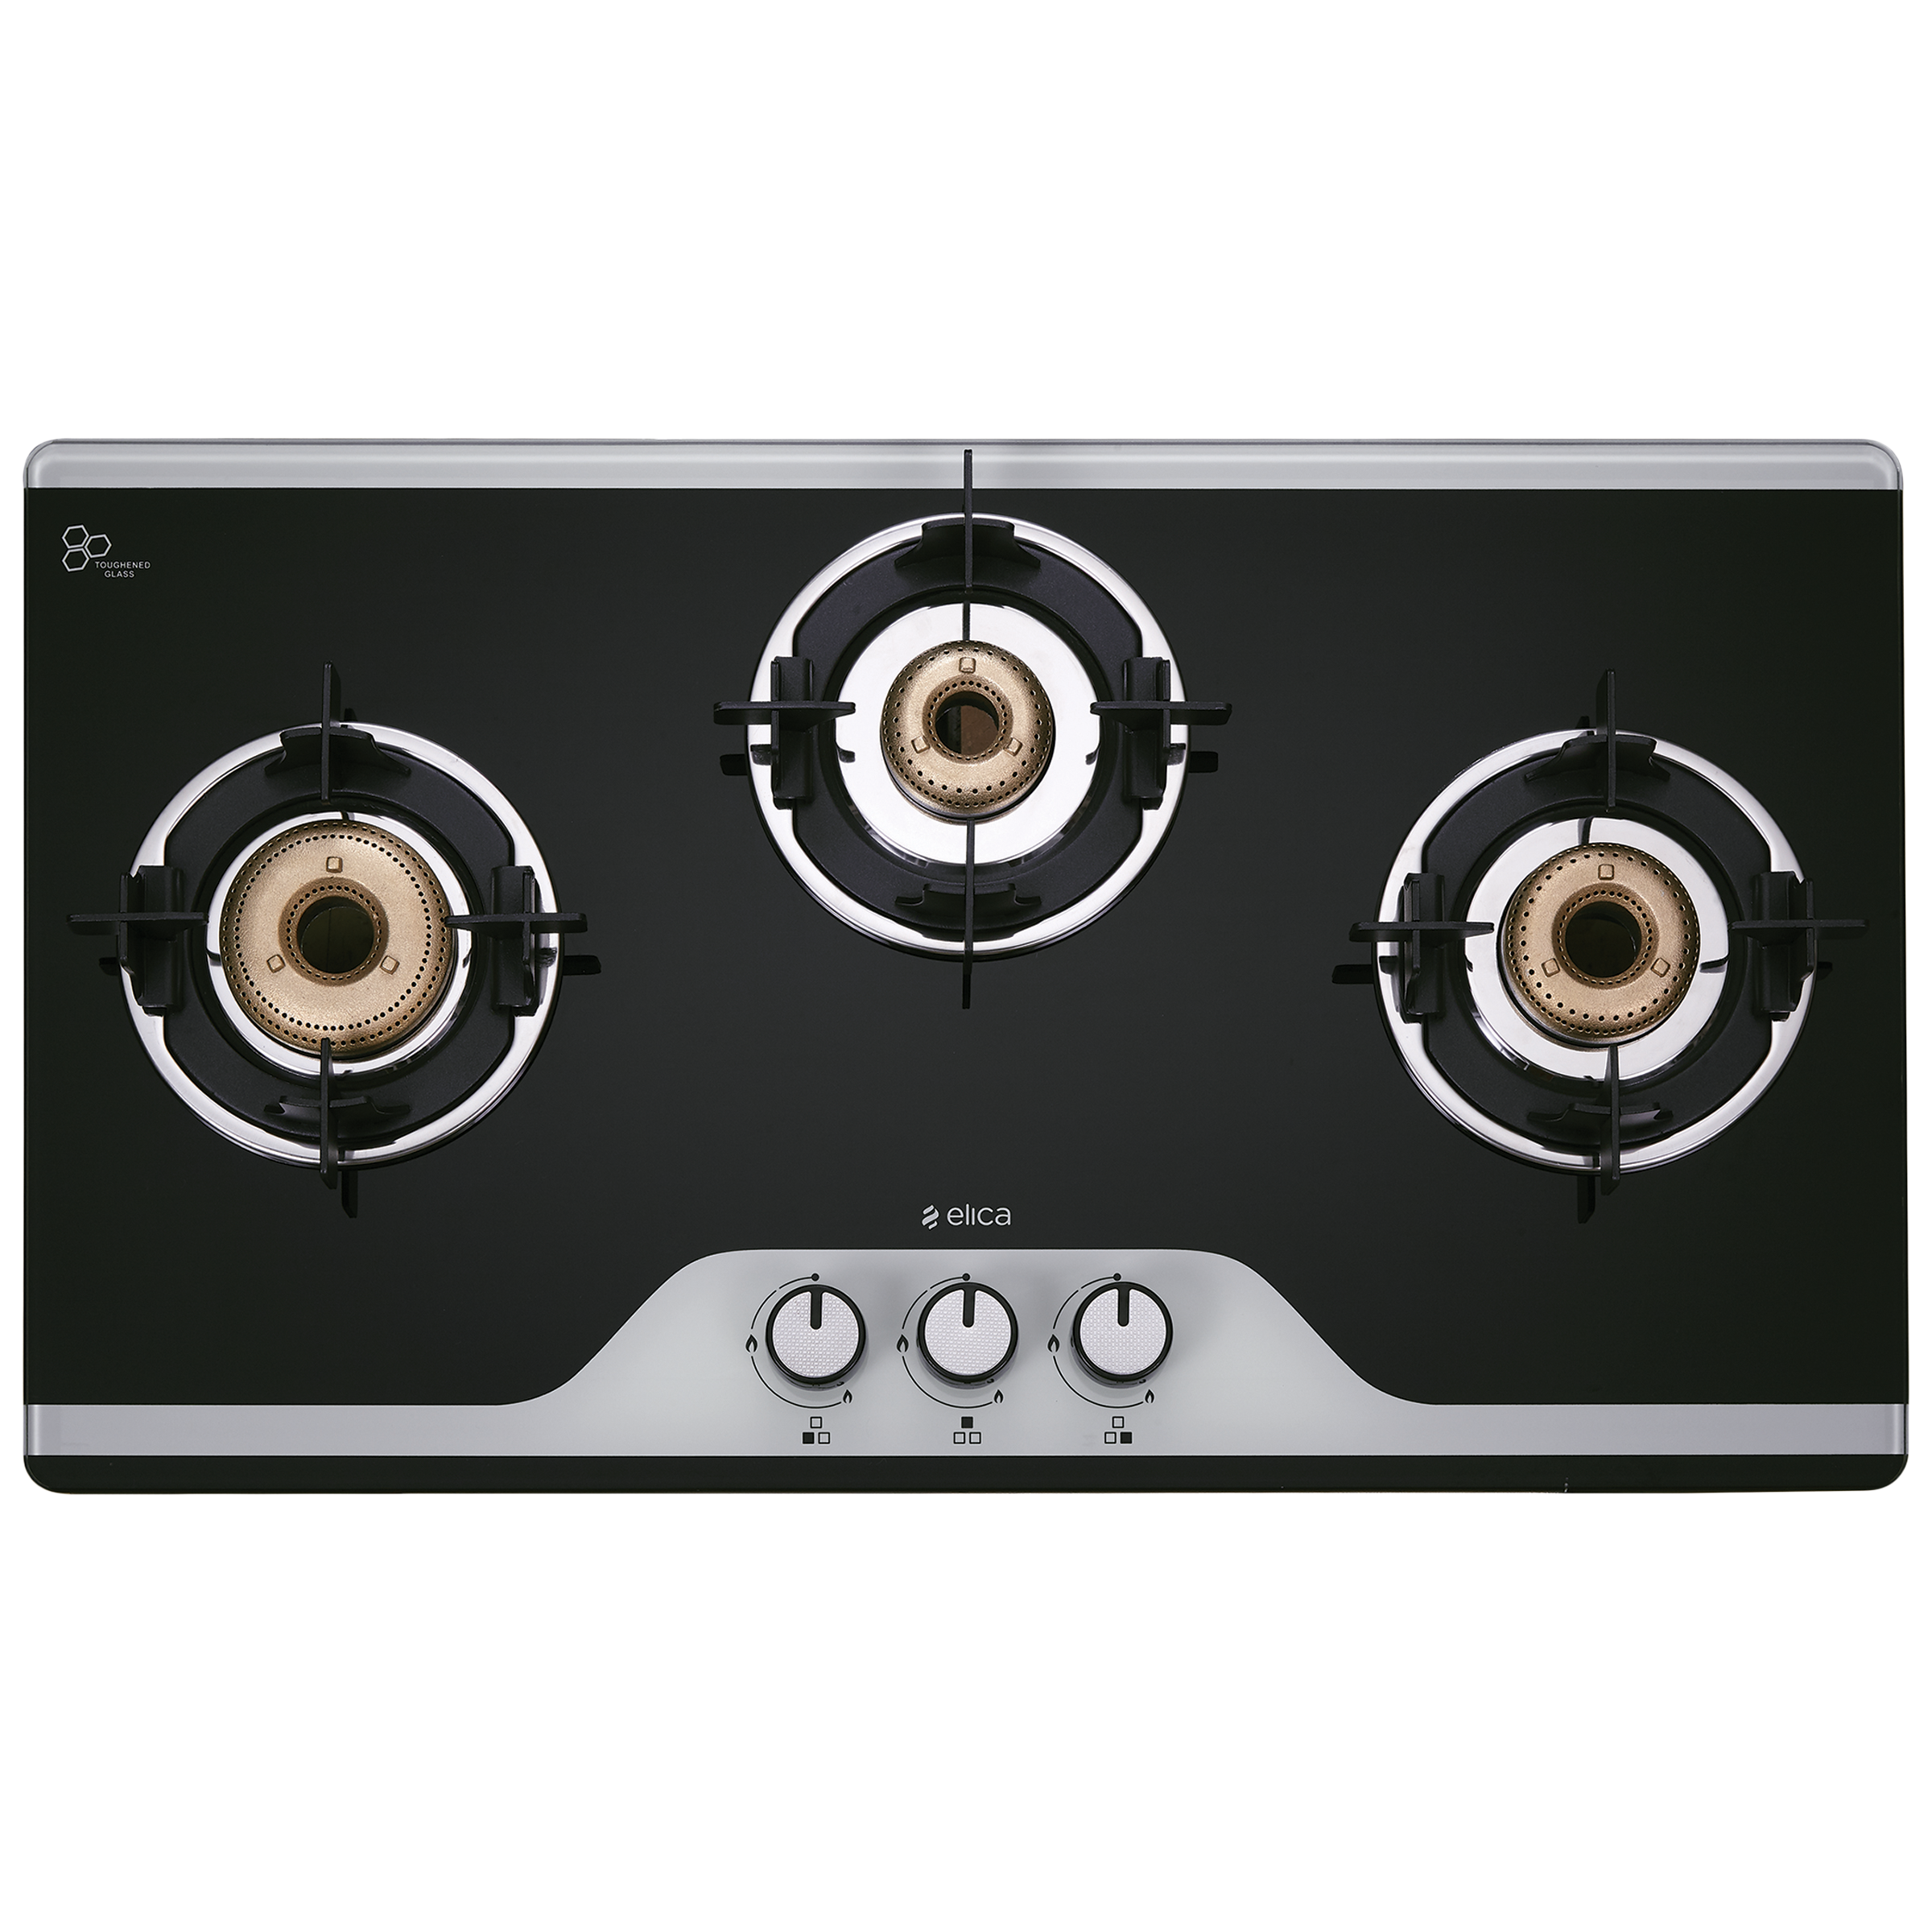 elica - elica 3 Burner Glass Gas Stove (Double Drip Tray, 773 CT DT Vetro(TKN DT), Black/Silver)